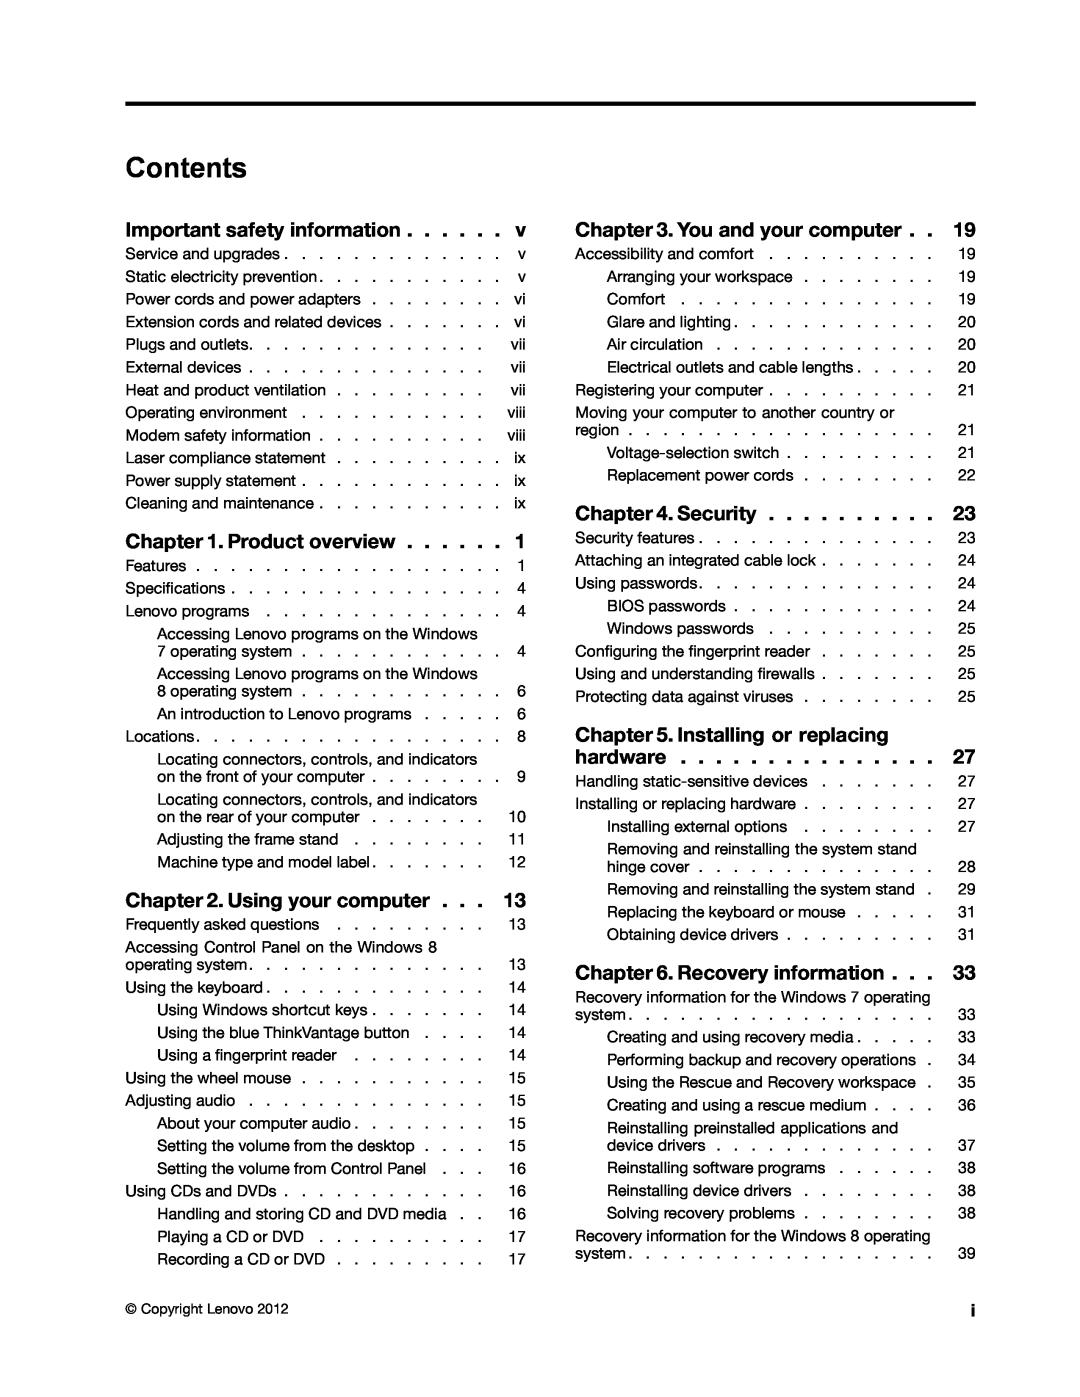 Lenovo 2117EKU manual Contents, Important safety information, Product overview, Using your computer, You and your computer 